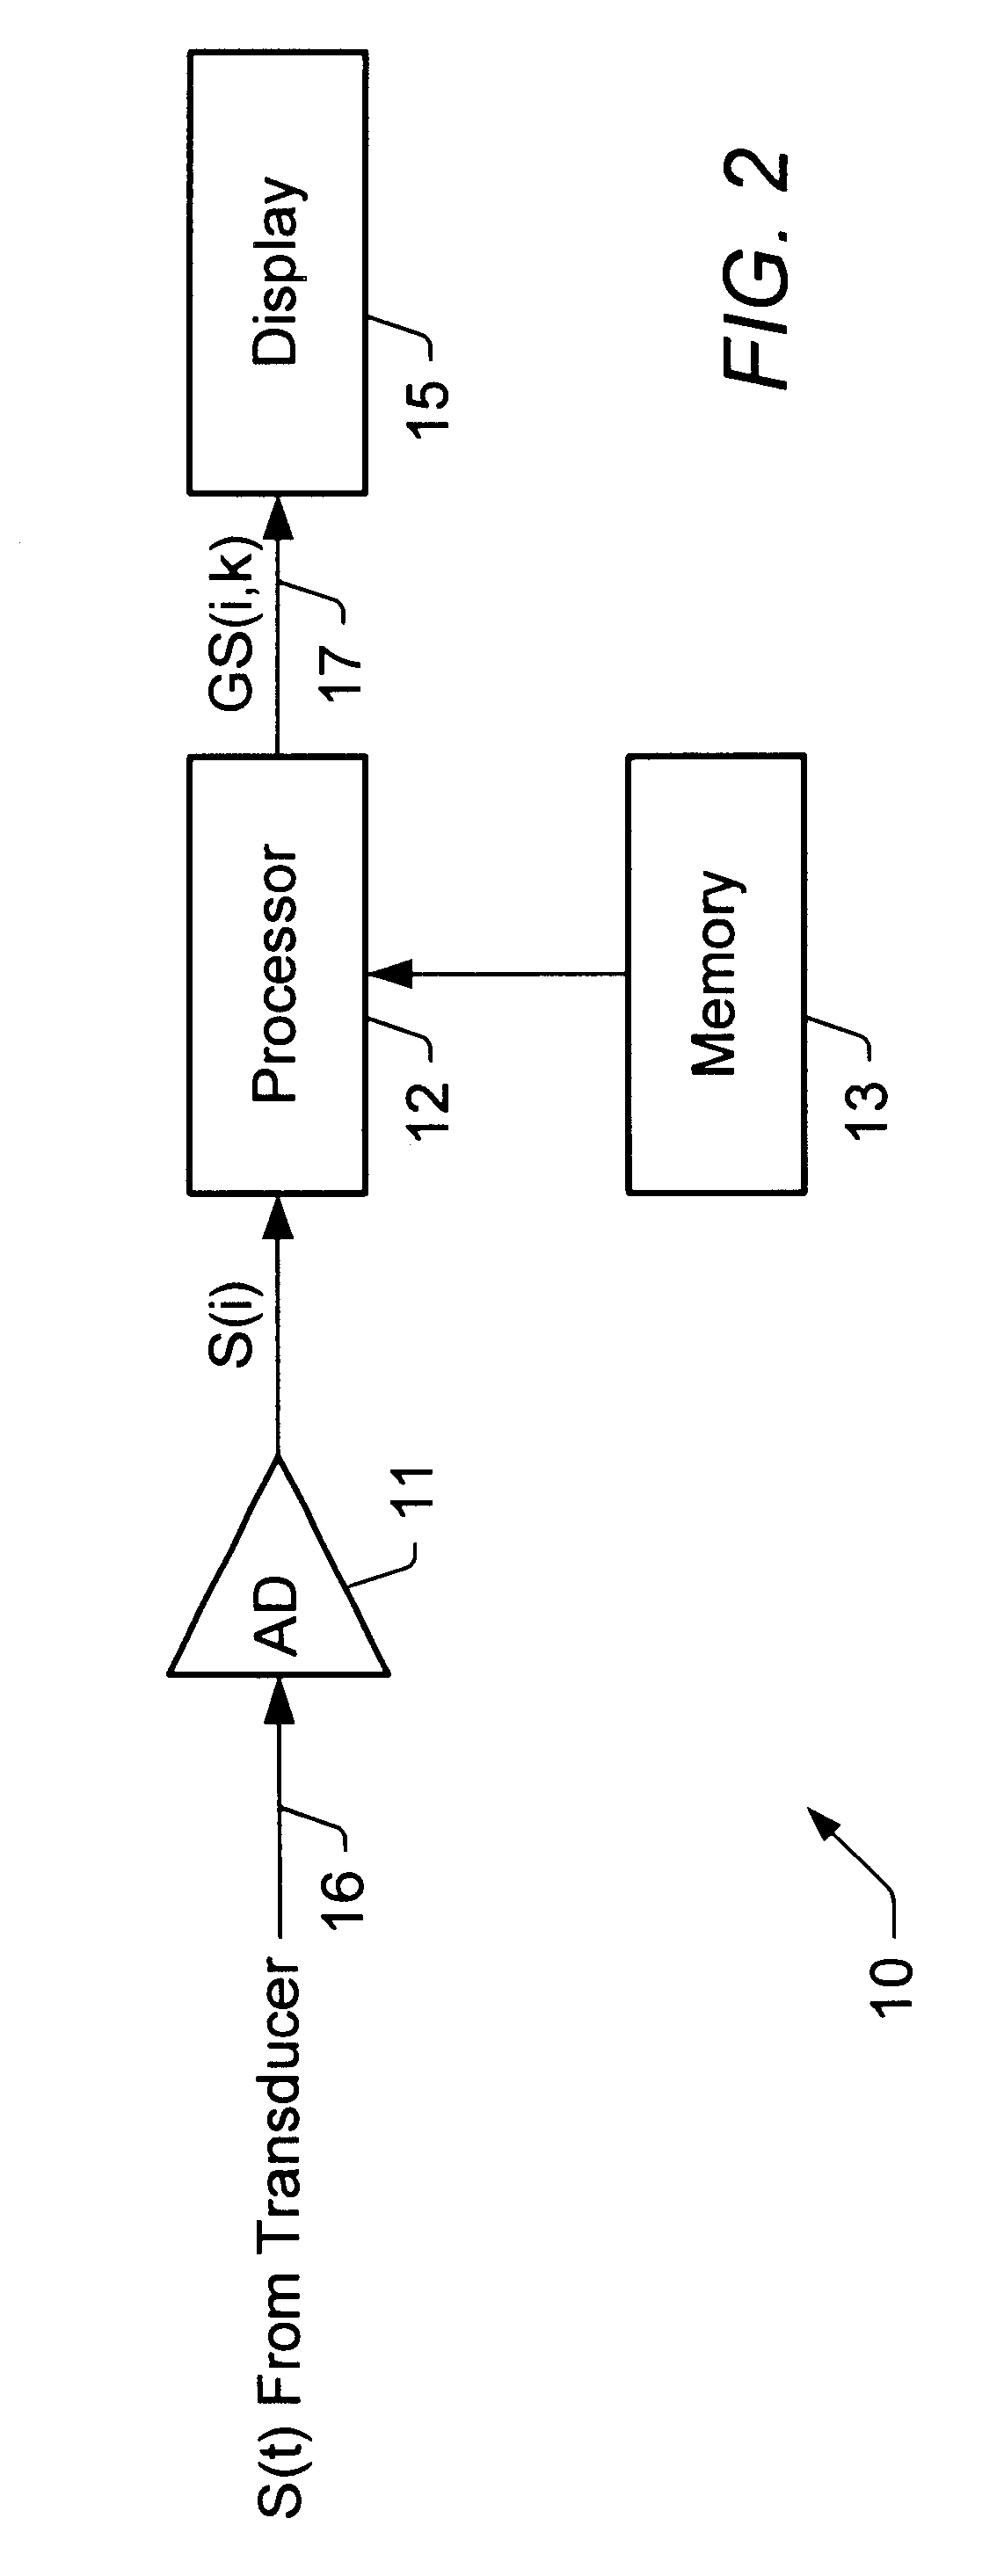 Signal analyzer system and method for computing a fast Gabor spectrogram